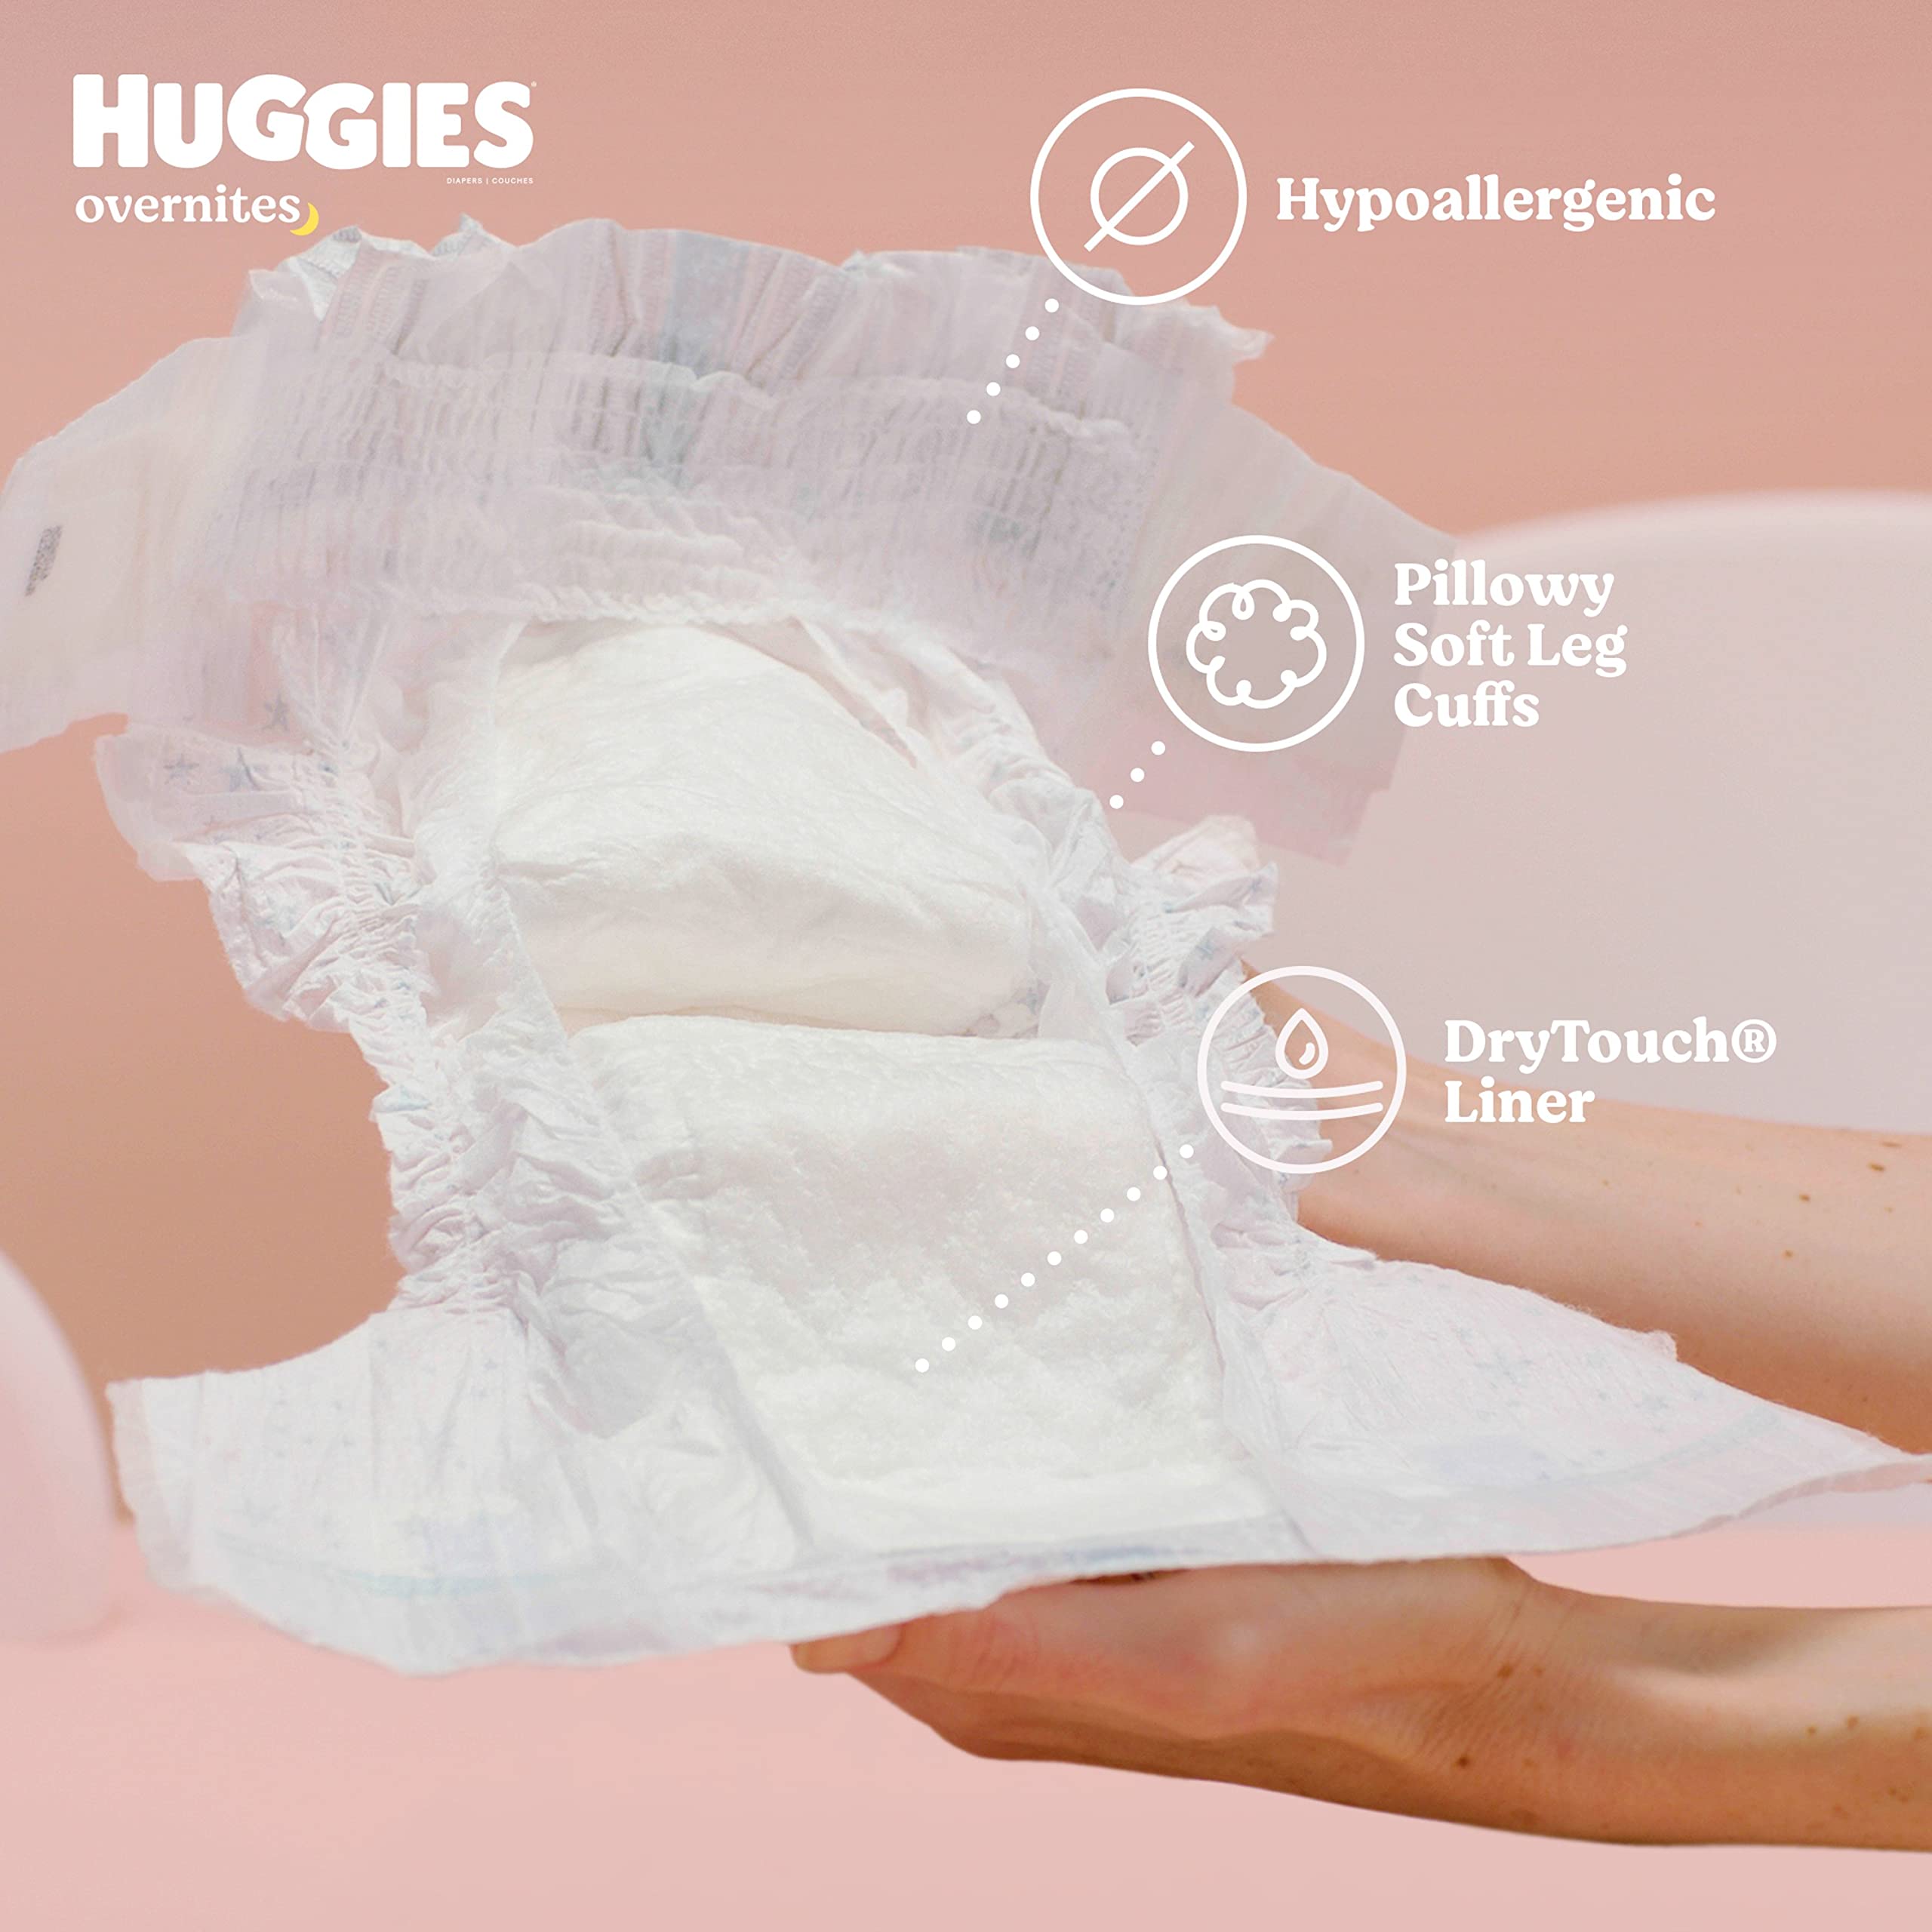 Huggies Overnites Nighttime Baby Diapers, Size 7 (41+ lbs), 60 Ct